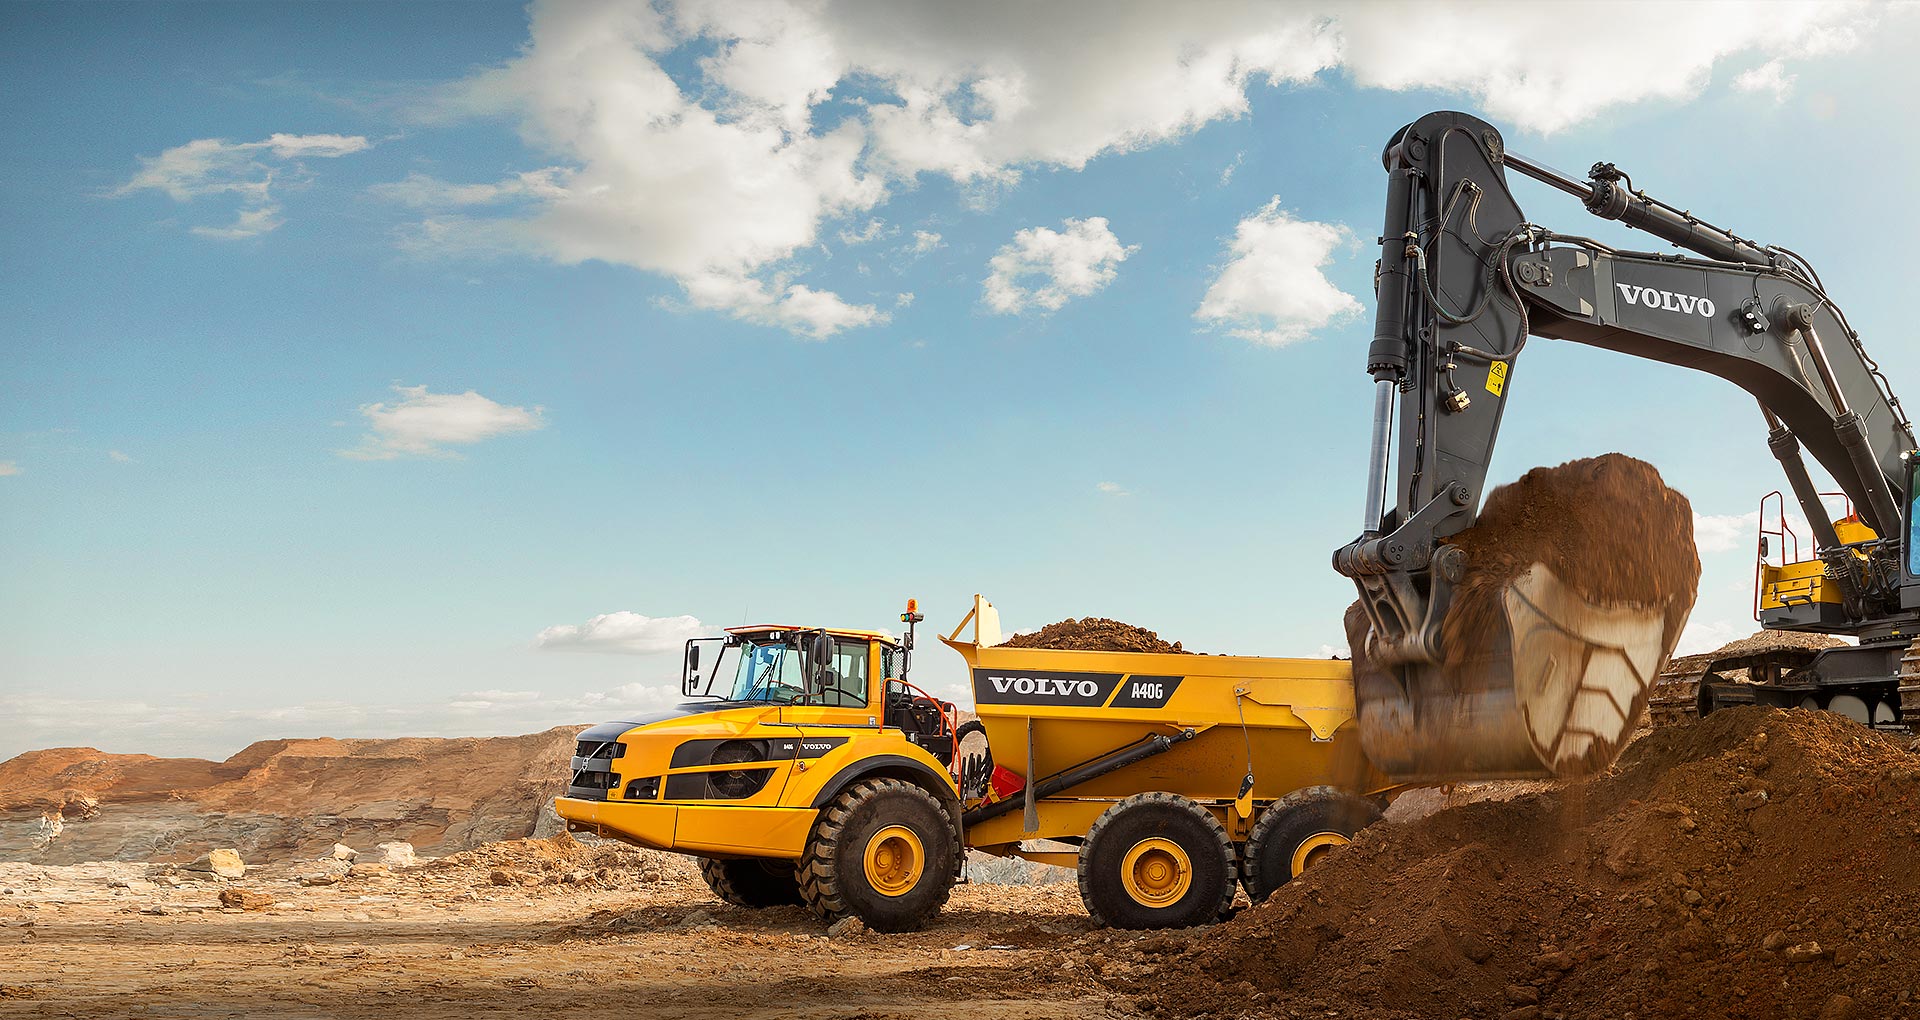 Official importer of Volvo Construction Equipment